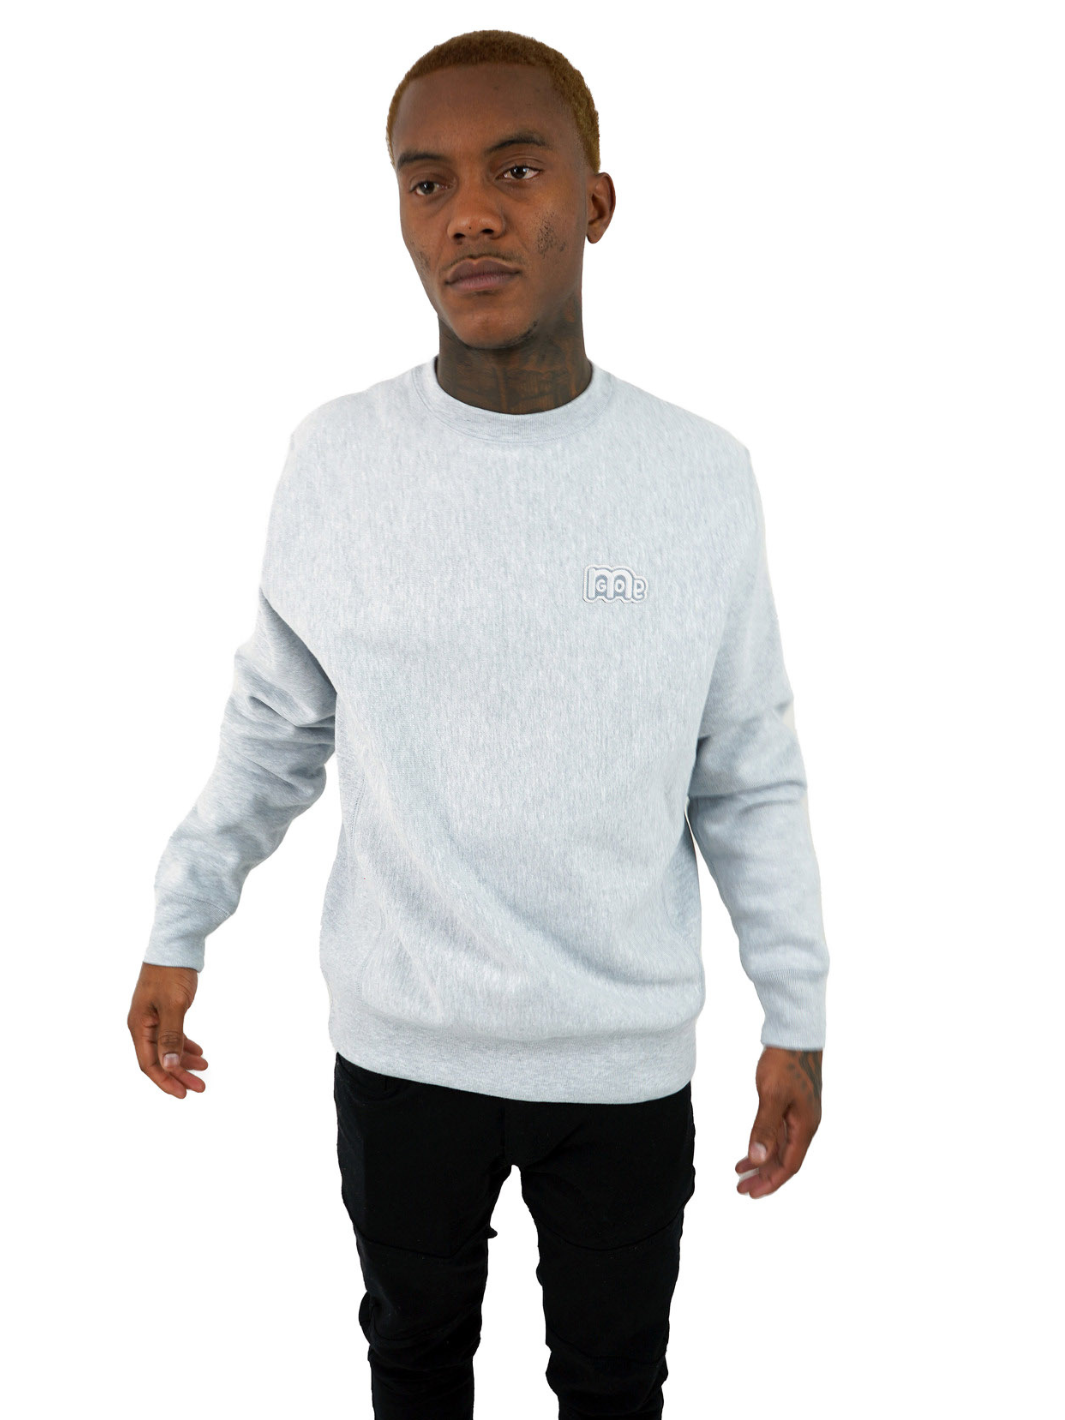 Luxury Grey Crewneck with premium cross grain design to ensure long-lasting comfort and wear. Featuring logo at left front and GODinme on the back.